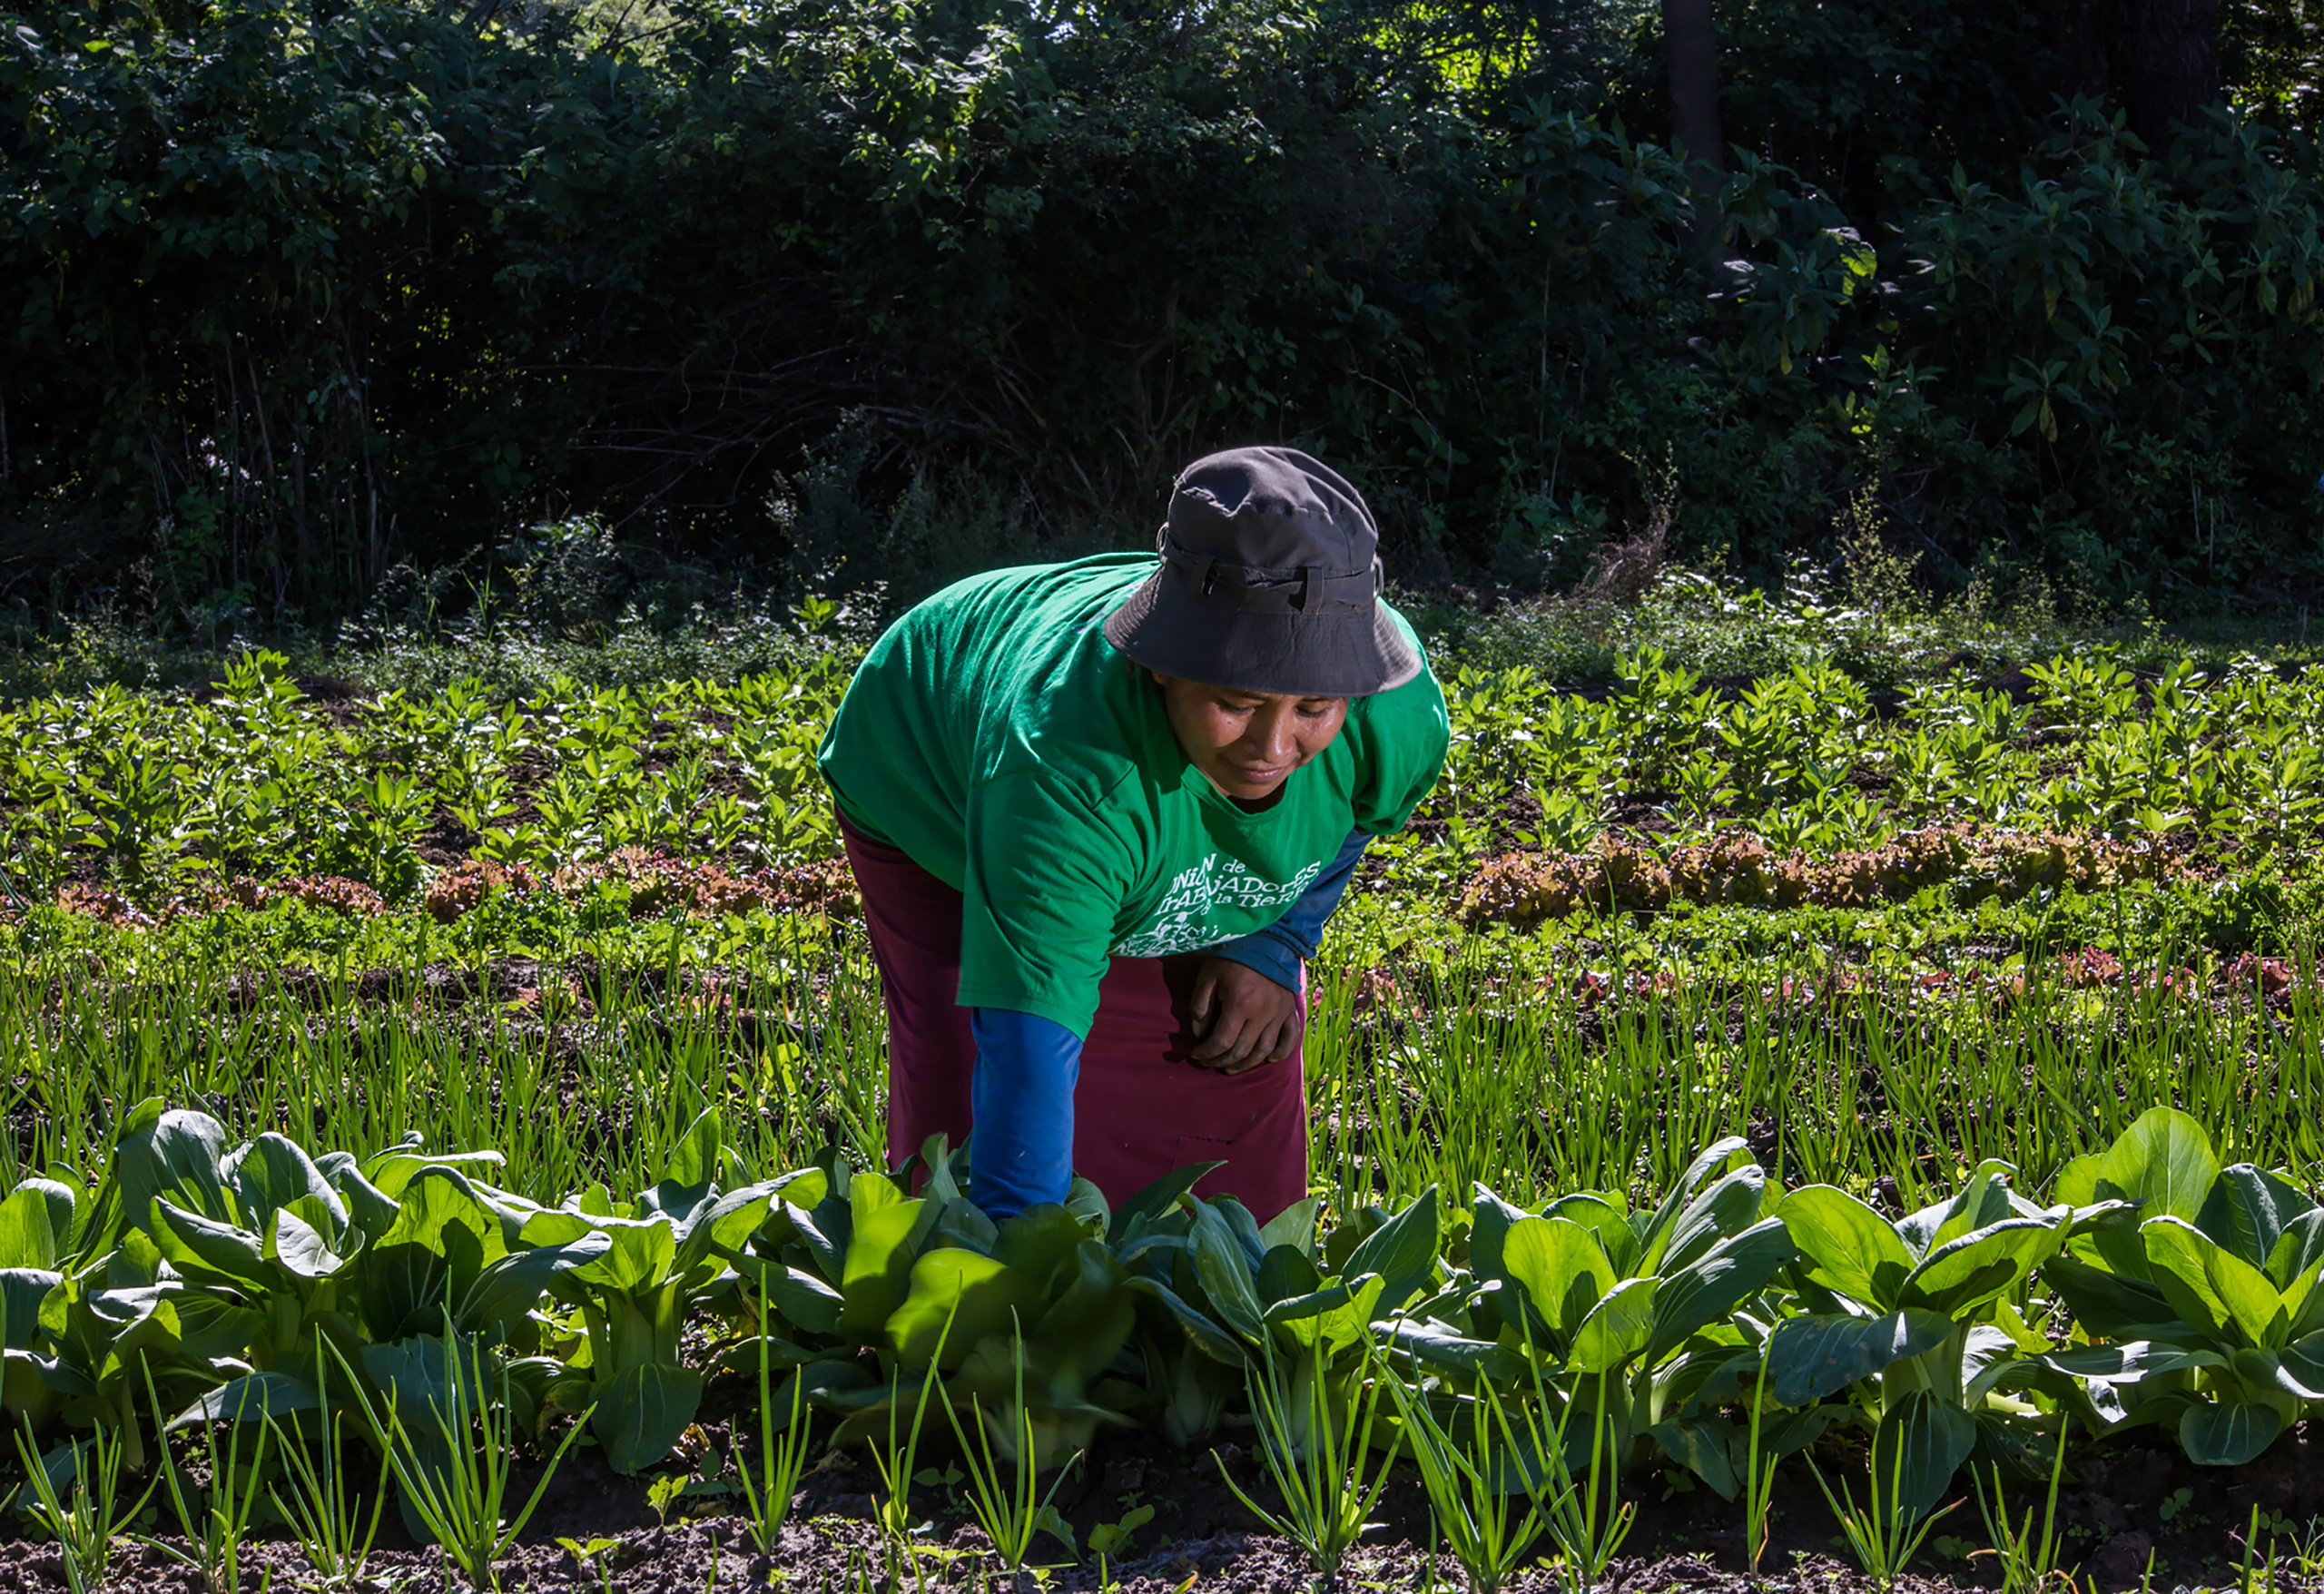 A woman bends over to tend to chard in a field green crops, trees in background. No chemical fertiliser, agroecological farm in Tucuman province, Argentina.